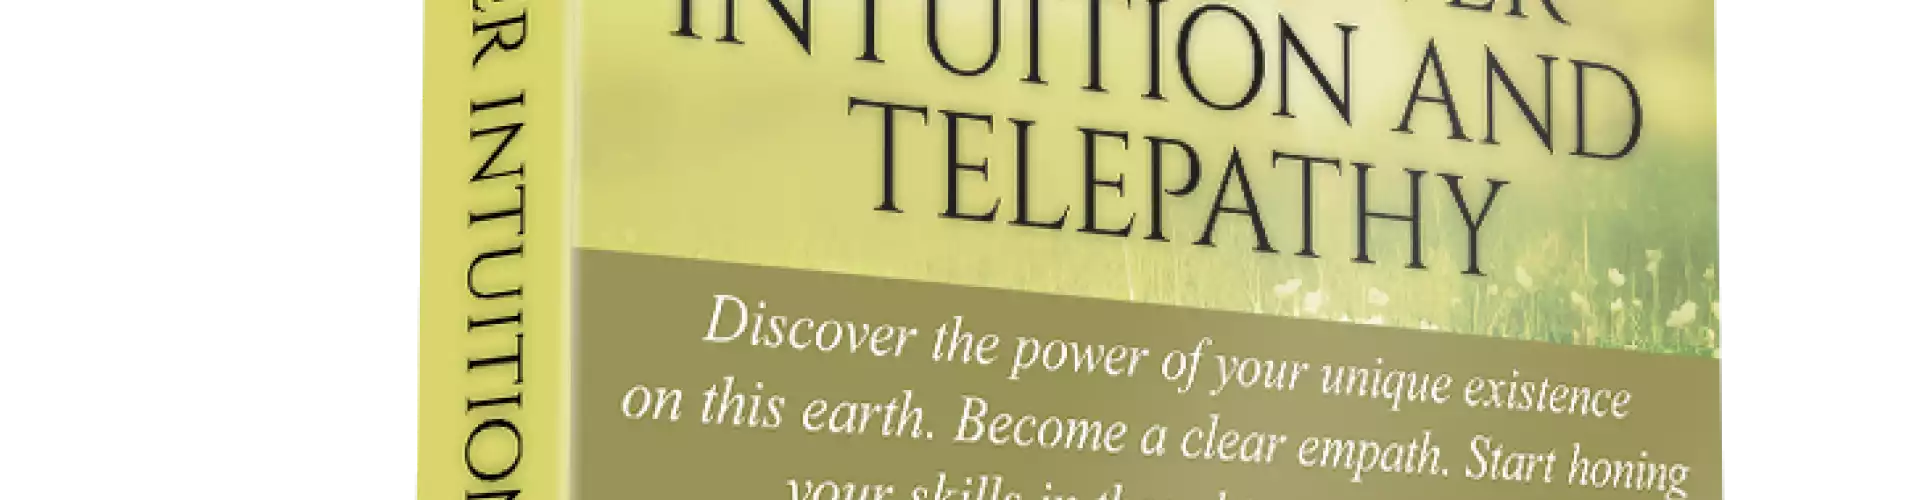 Awaken Your Power Intuition and Telepathy. Intro